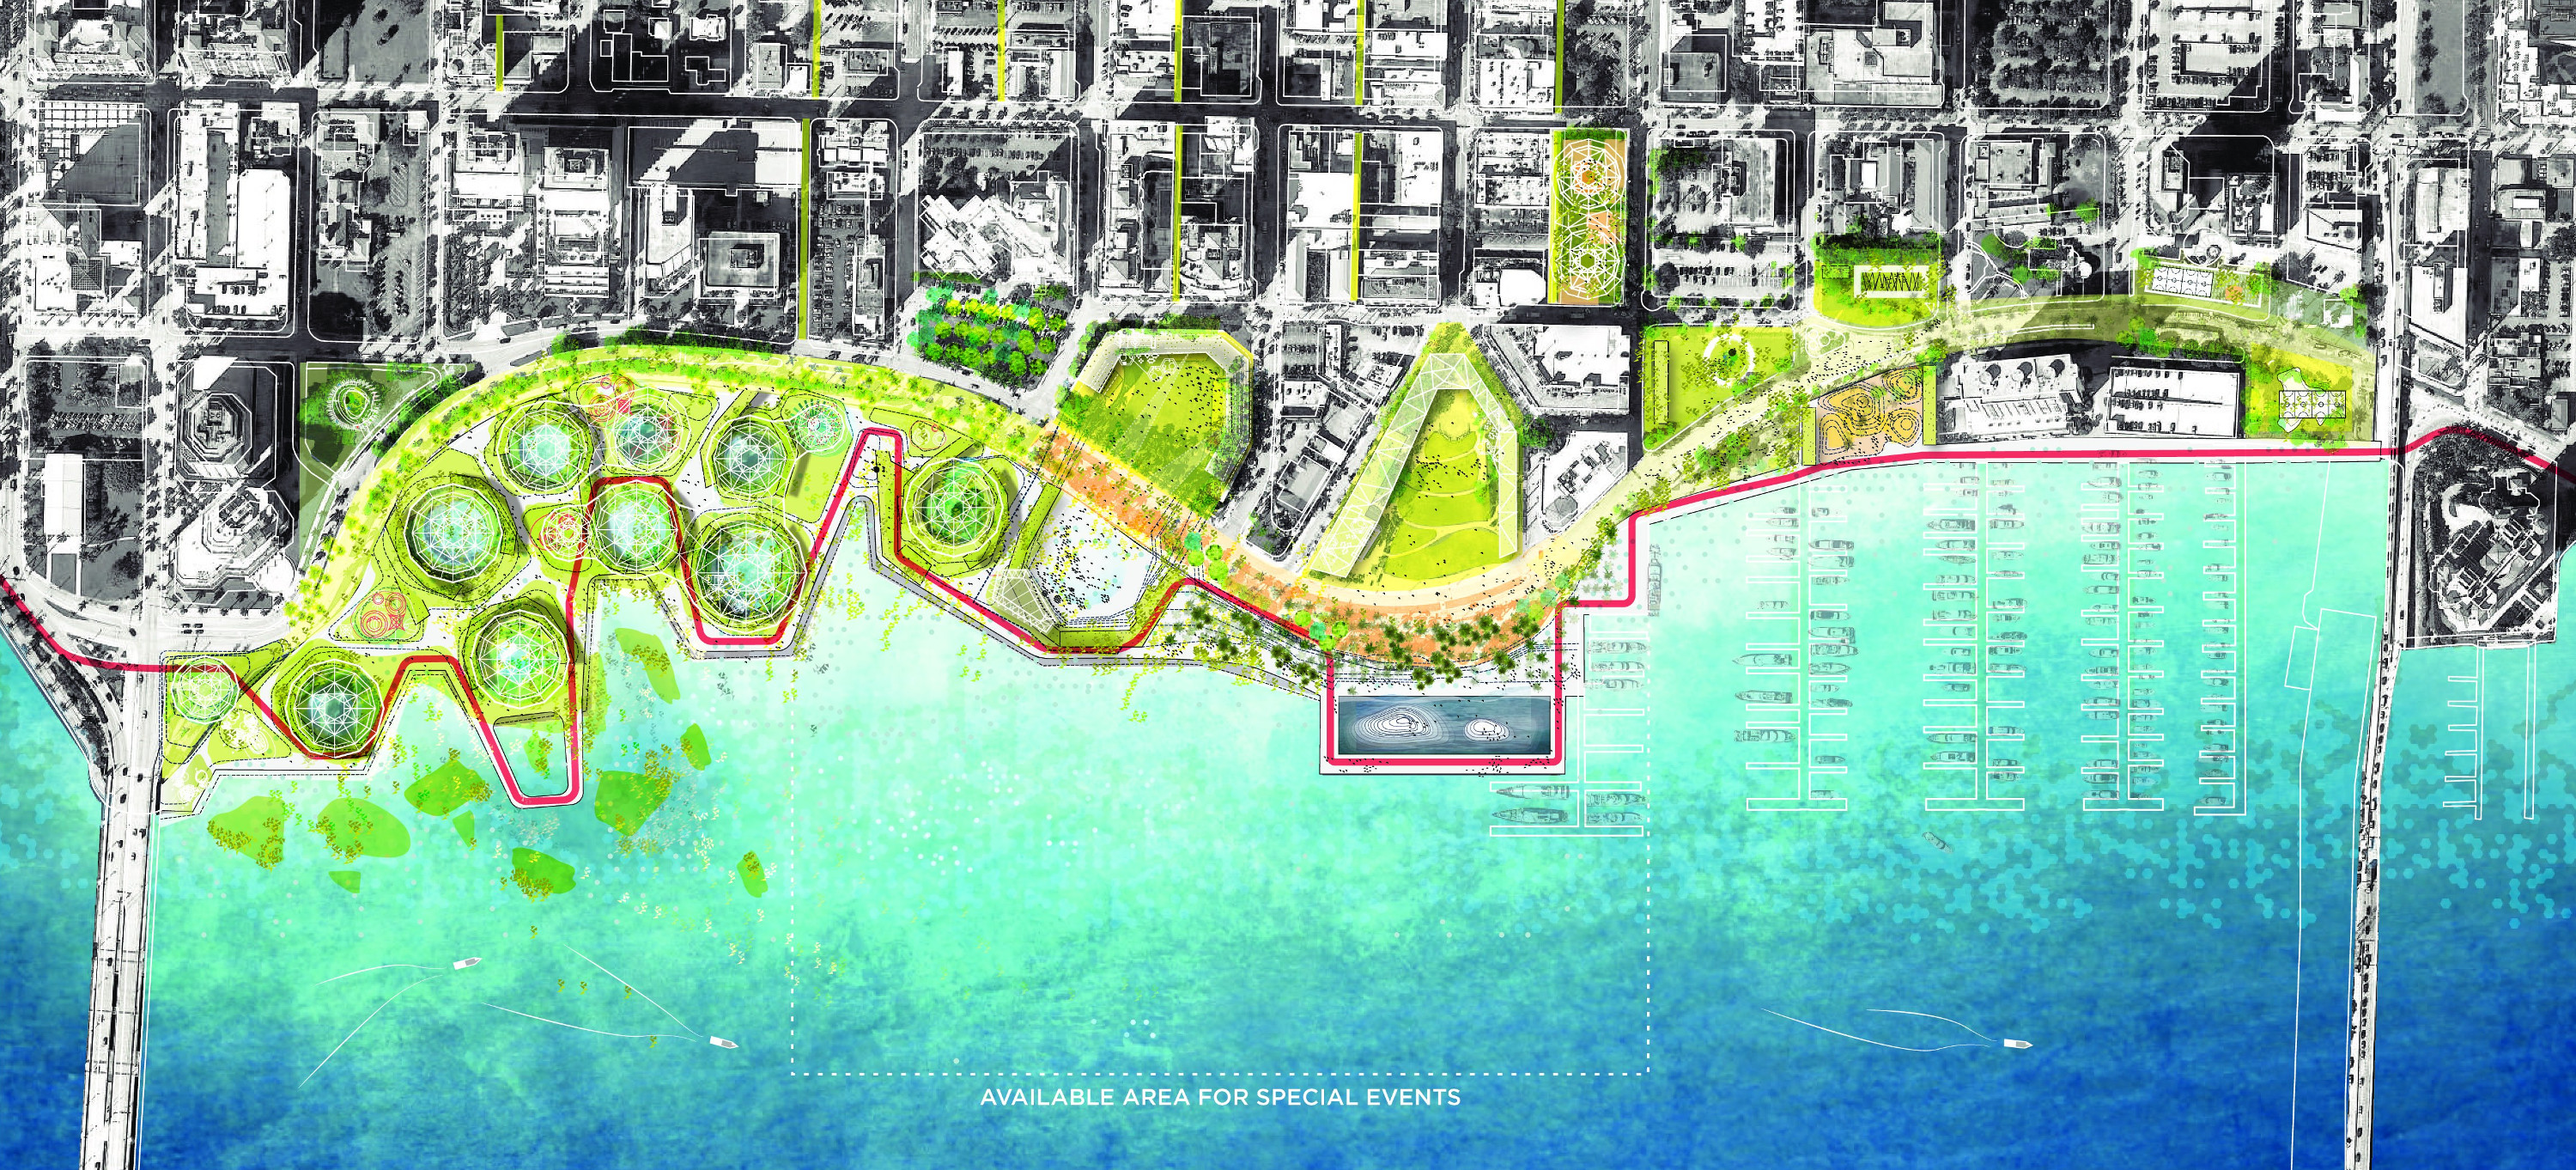 5 dramatic ways the West Palm Beach Waterfront could change